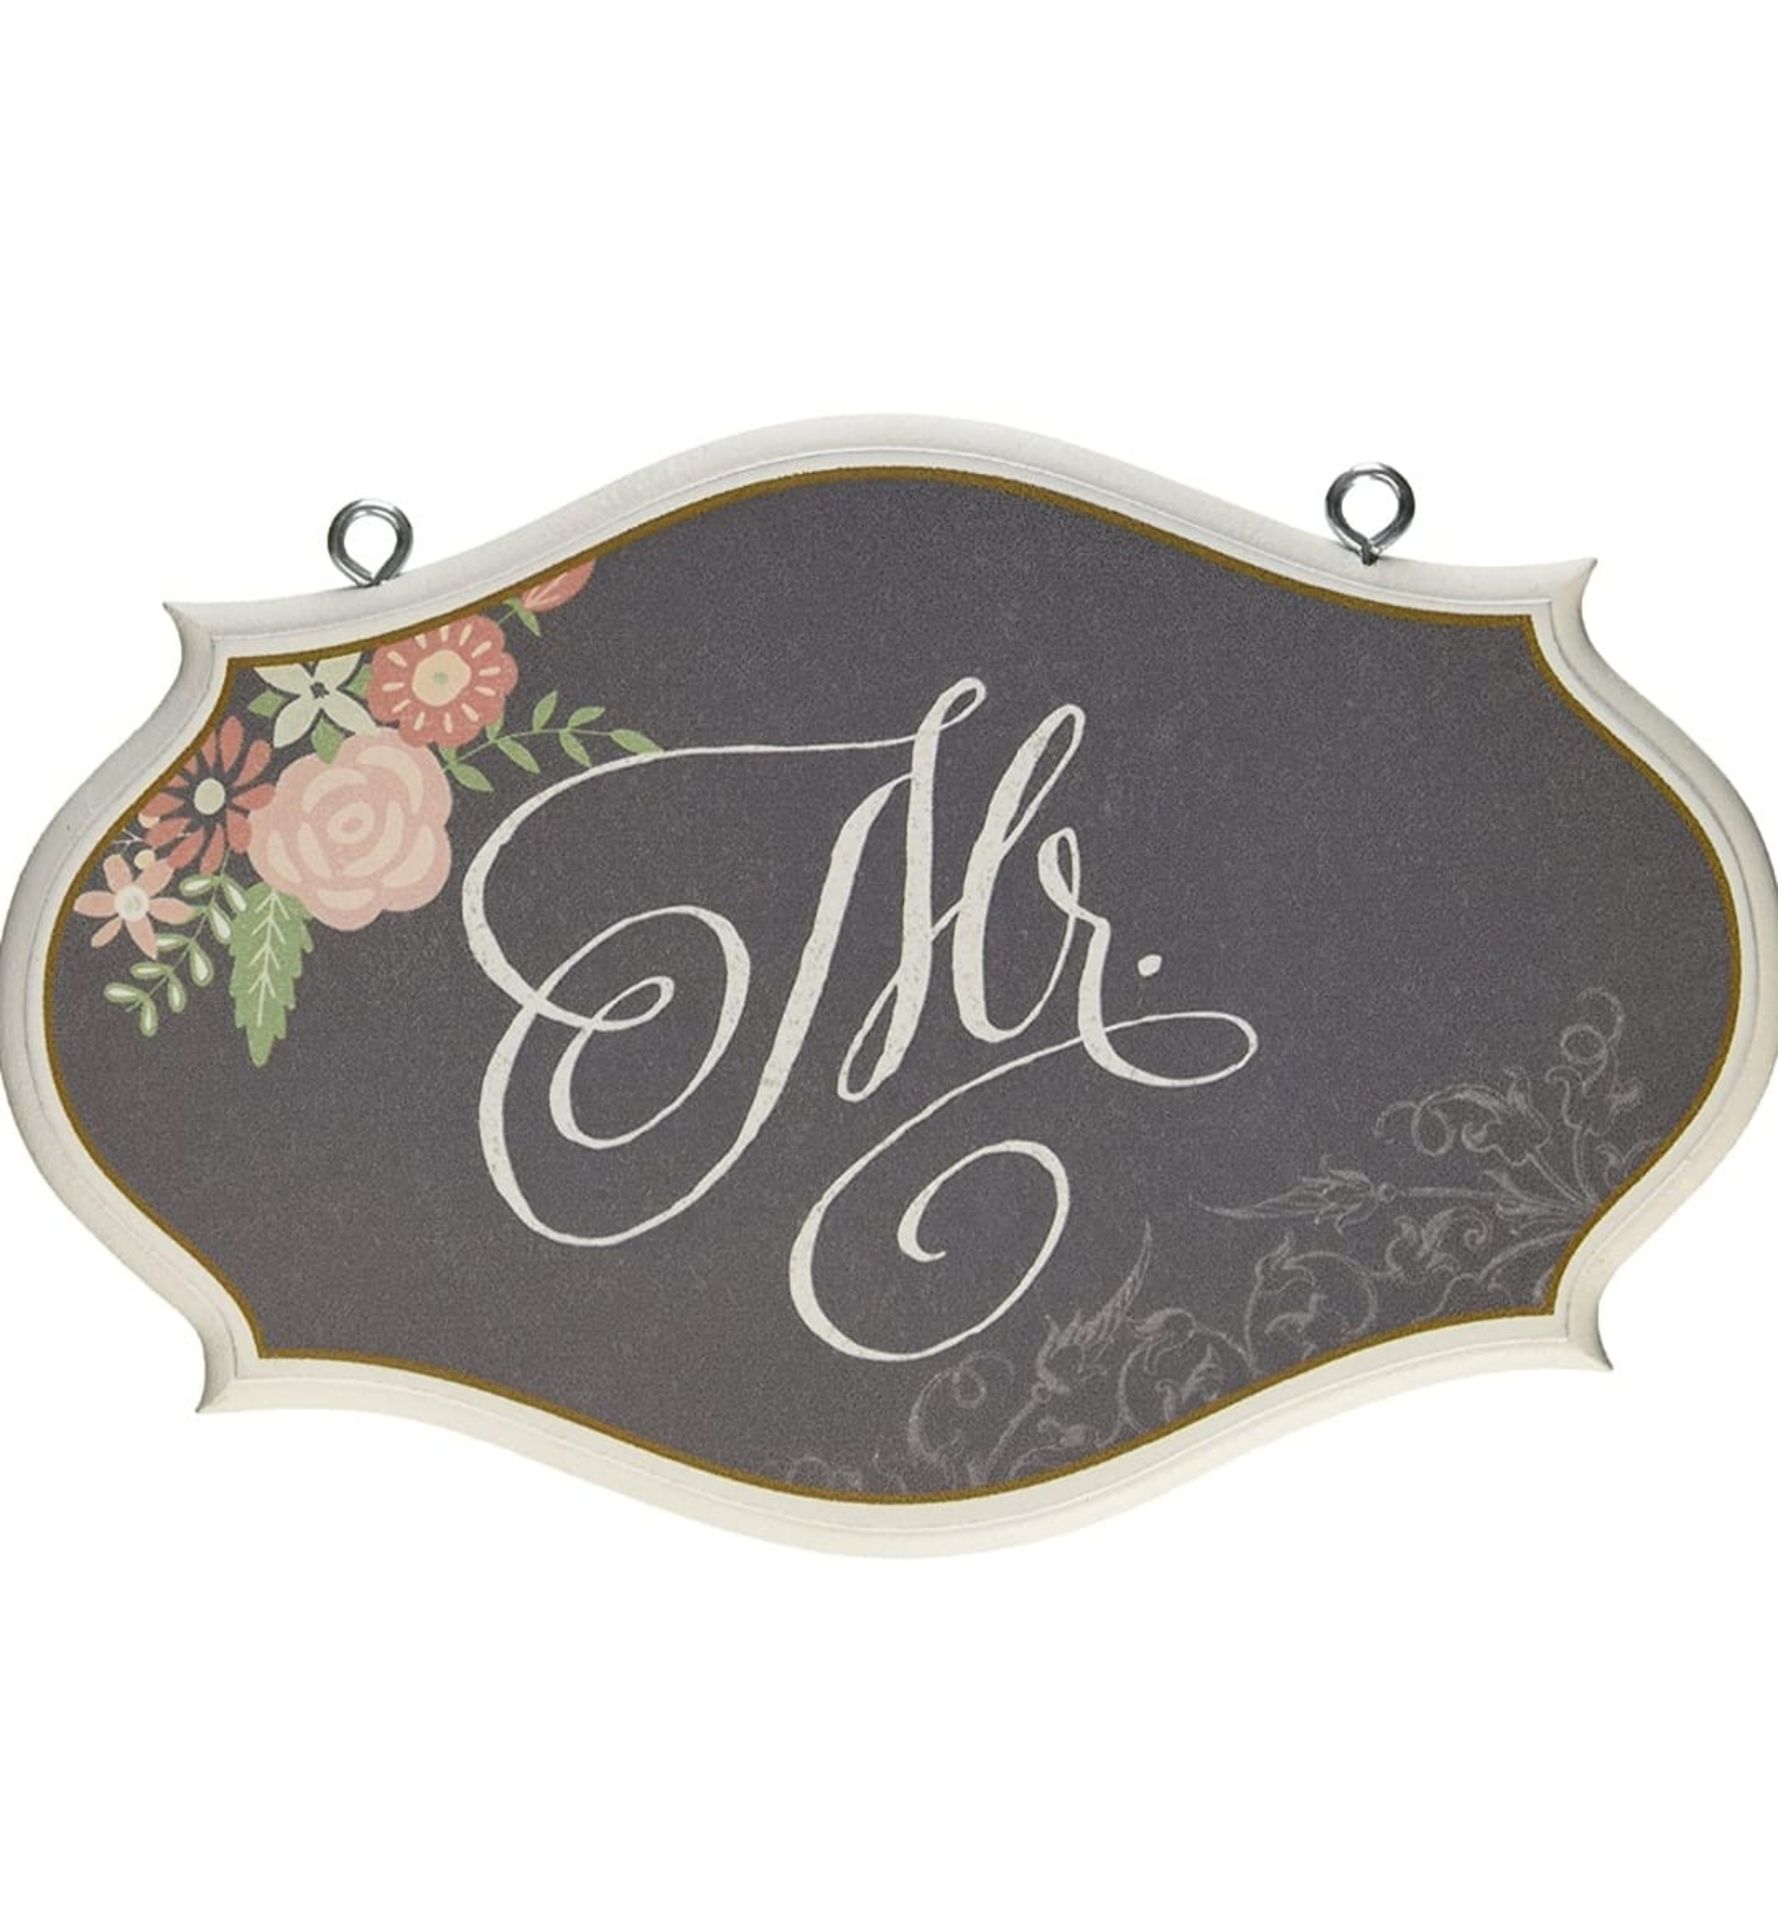 X 12 Mr & Mrs OVAL WOODEN SIGNS - CONSISTING OF X 2 Mr IN WHITE& X 10 Mr INN BLACK BY LILLIAN ROSE - - Image 2 of 2